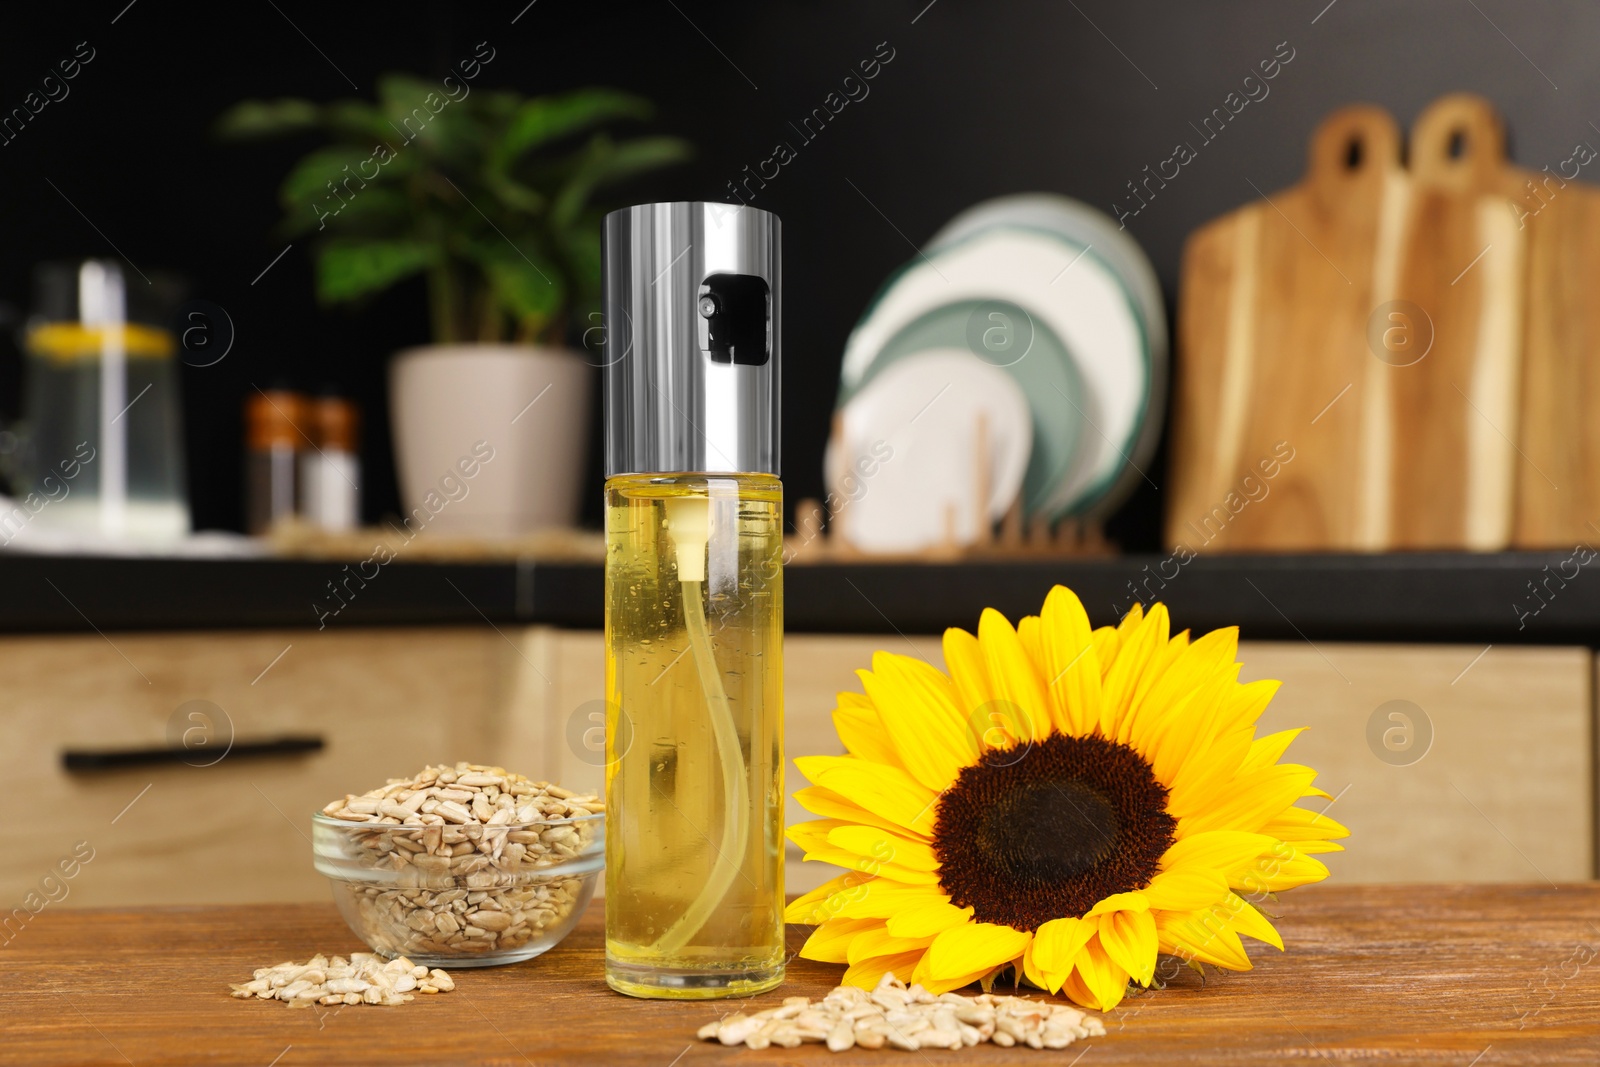 Photo of Sunflower, seeds and spray bottle with cooking oil on wooden table in kitchen